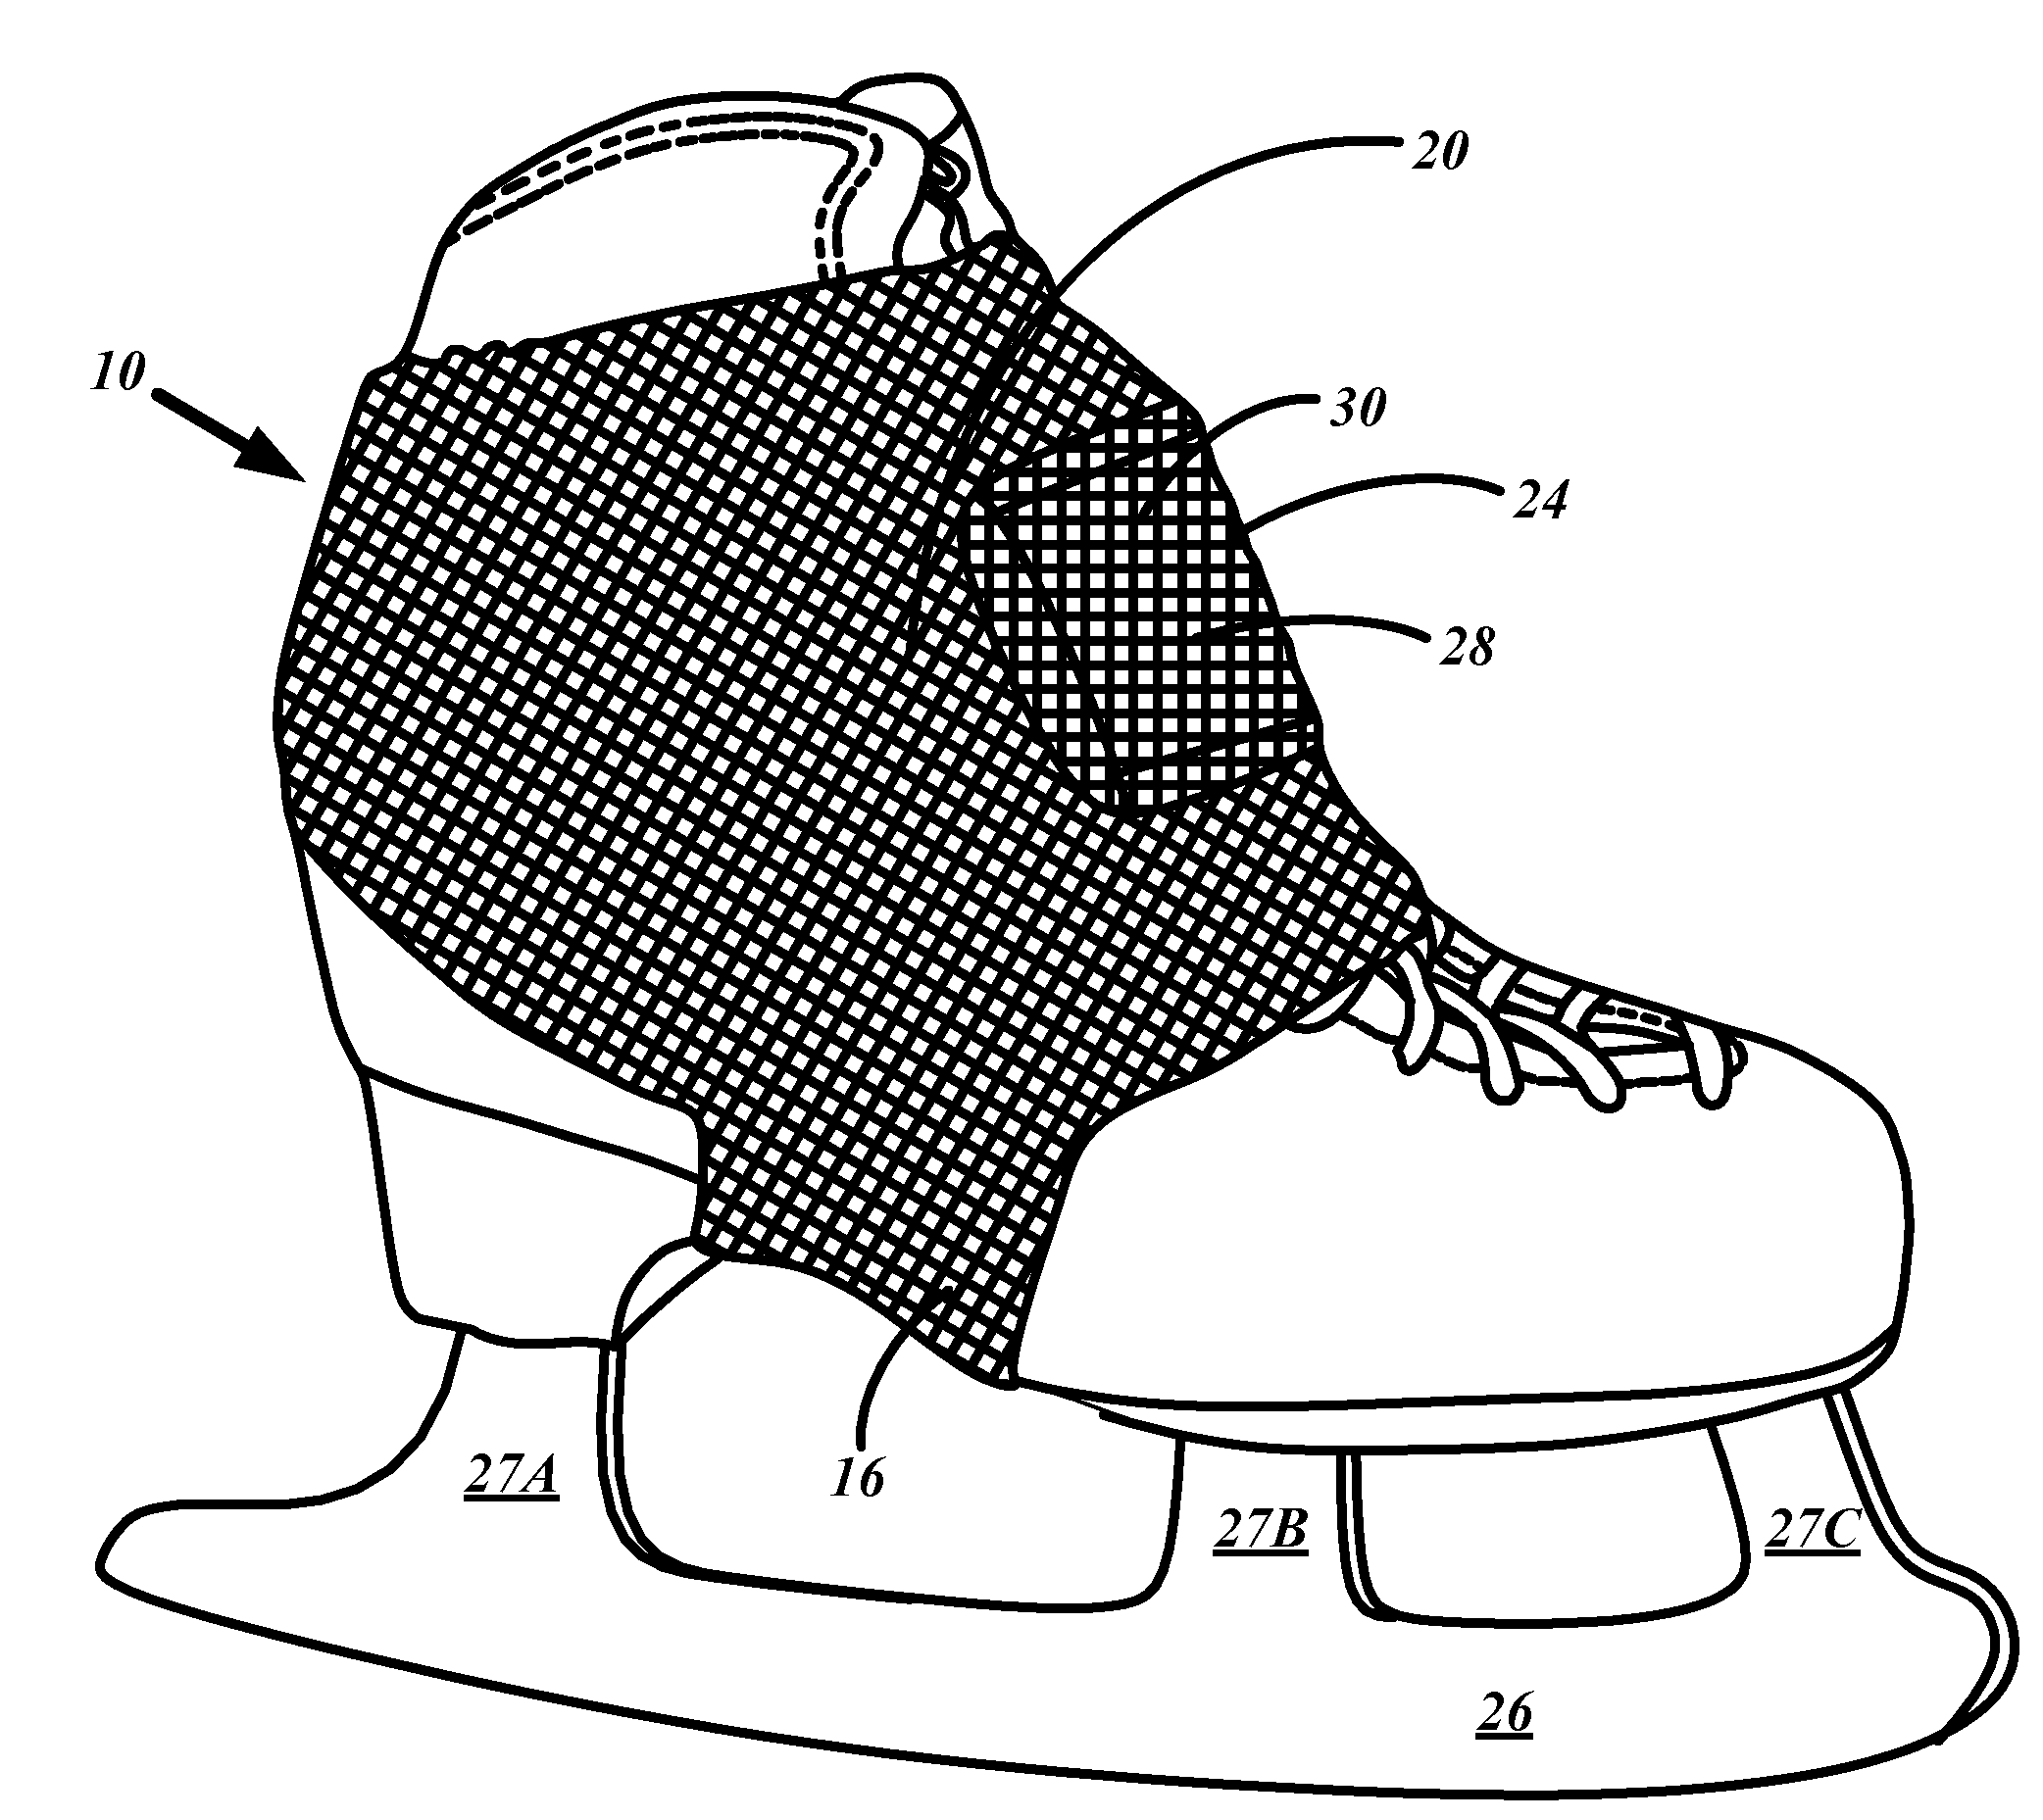 Footwear contact indication system